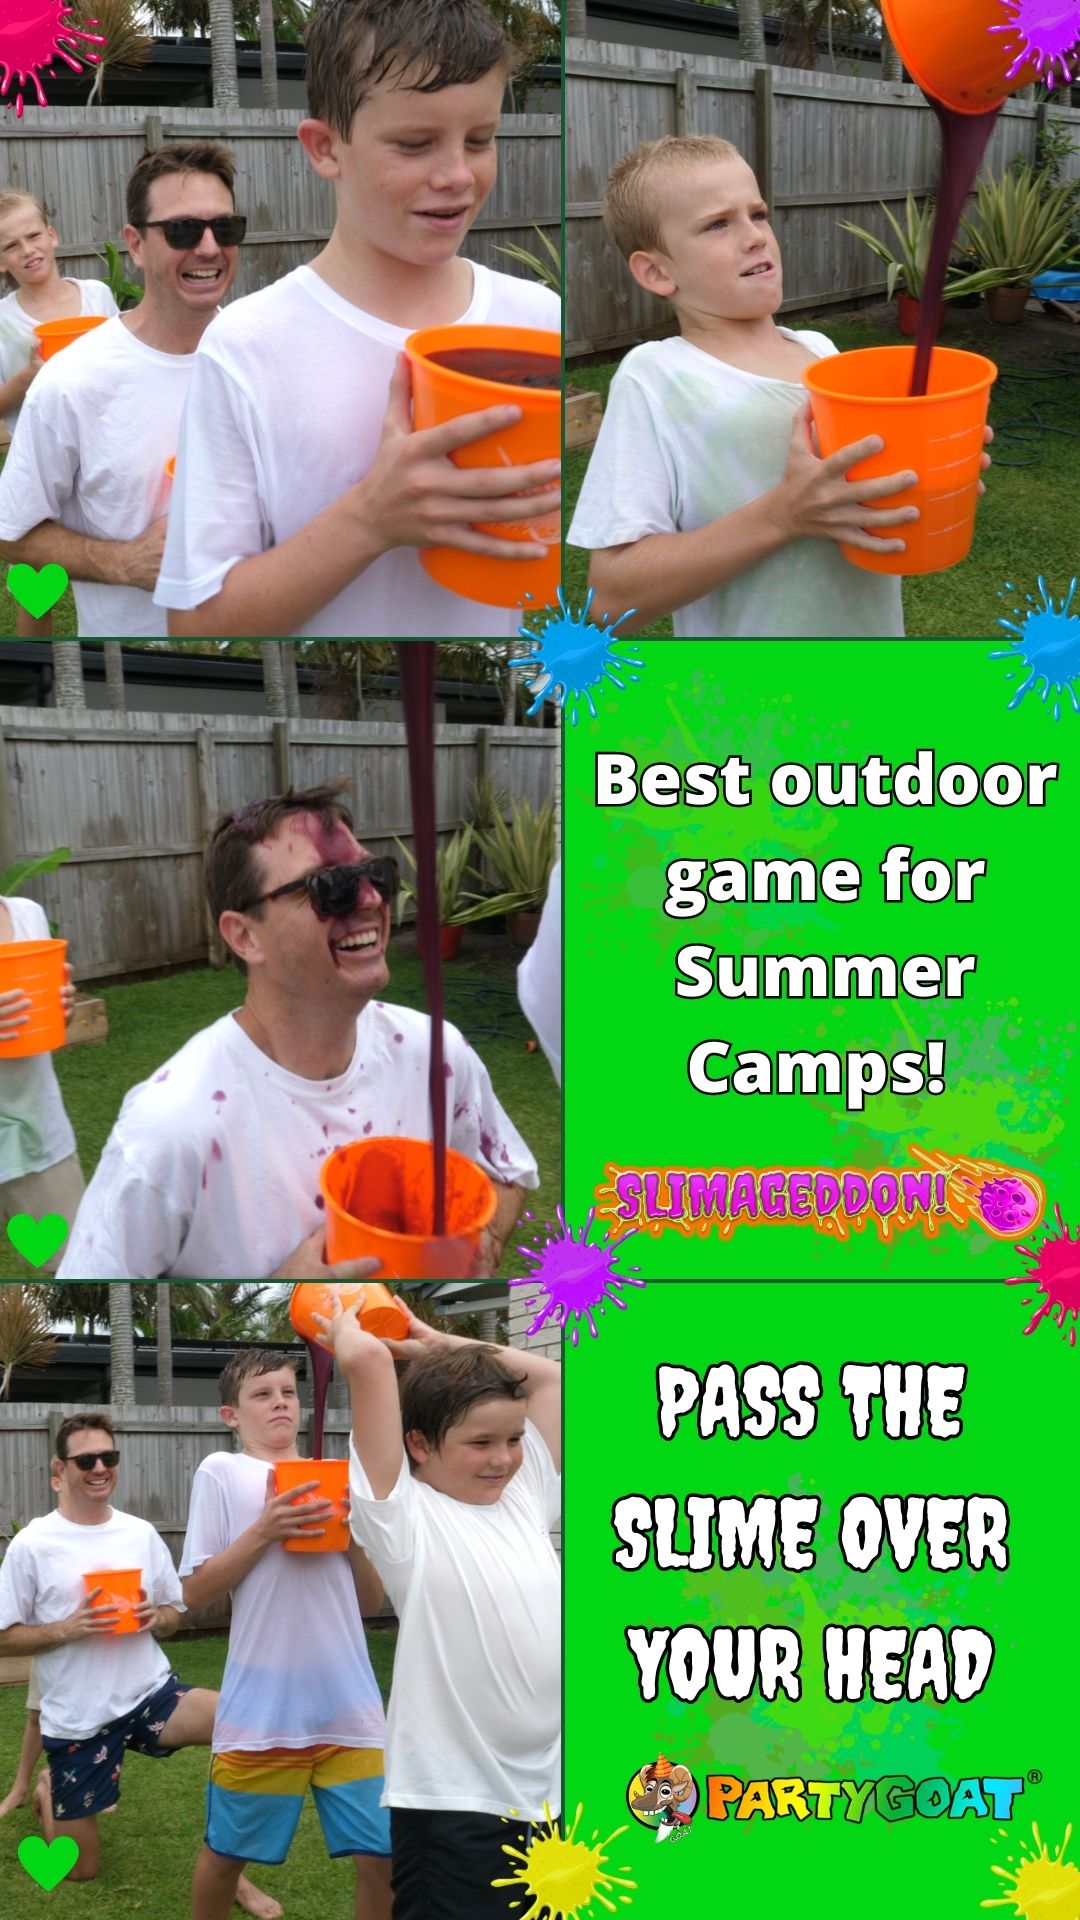 Best outdoor youth group game for large group